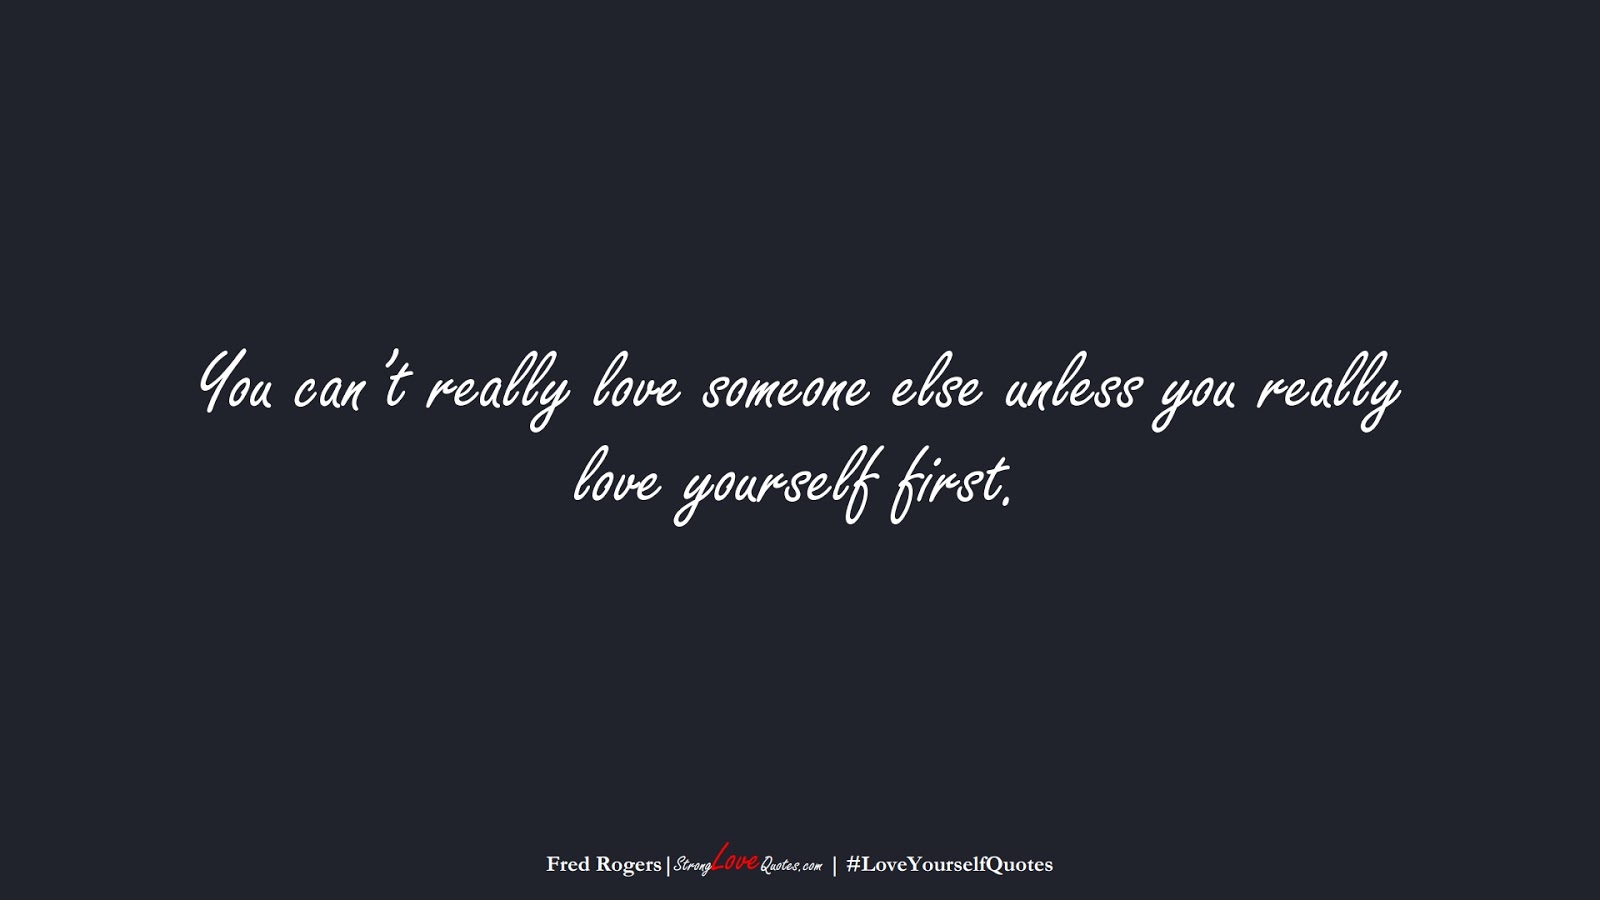 You can’t really love someone else unless you really love yourself first. (Fred Rogers);  #LoveYourselfQuotes